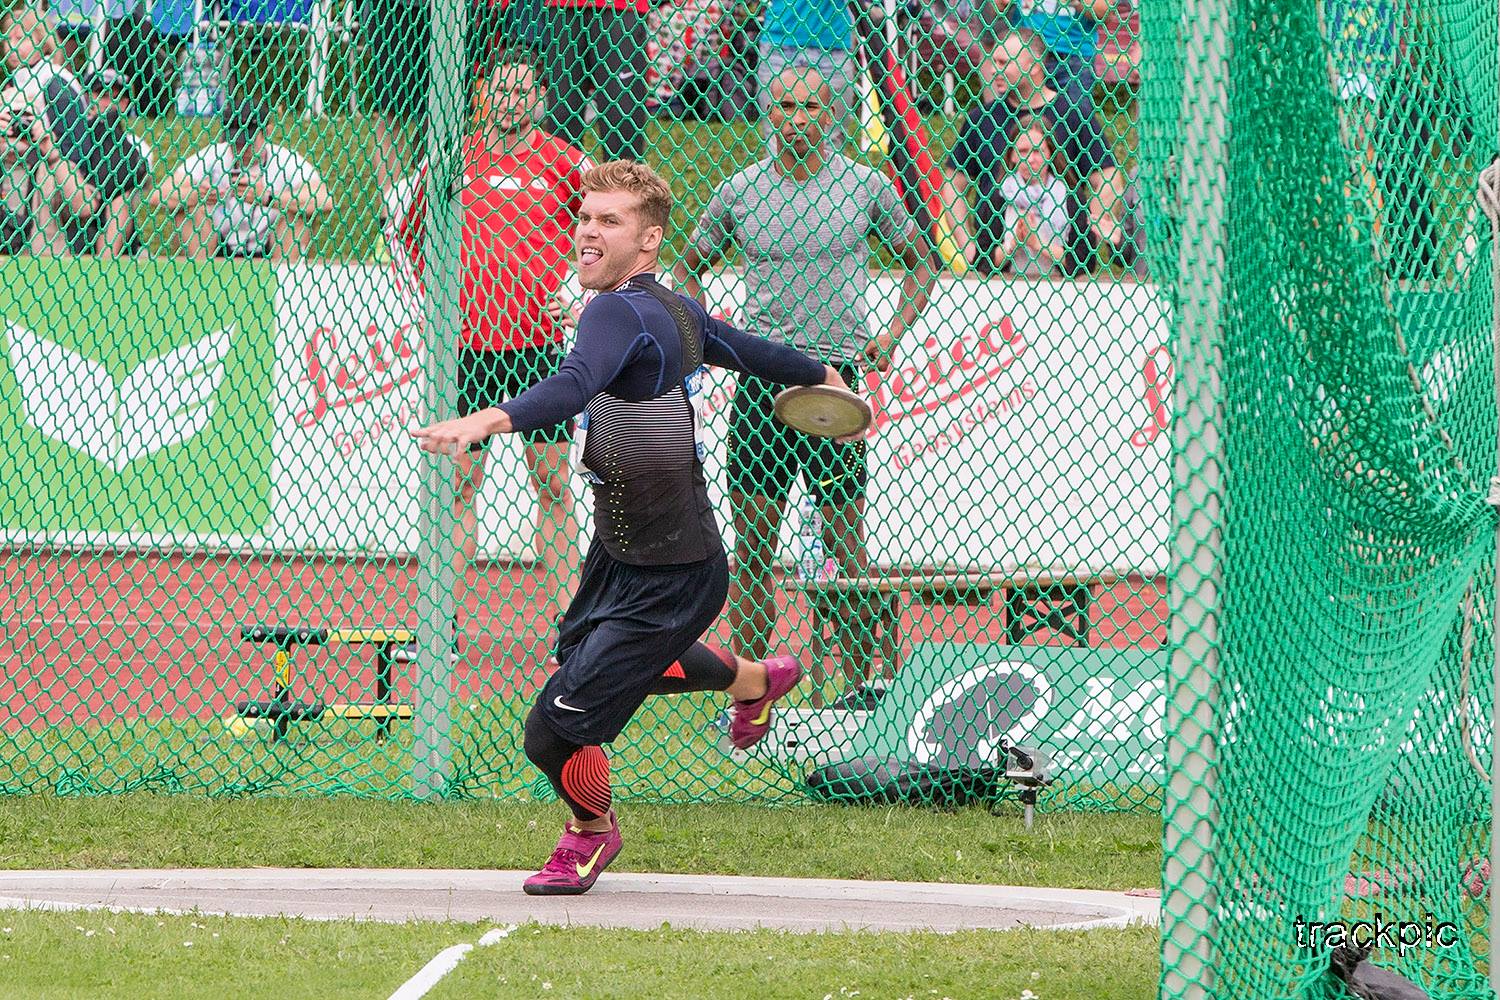 Kevin Mayer on the foreground, Kai Kazmirek and Damian Warner behind the cage. Photo by Olavi Kaljunen / trackpic.net